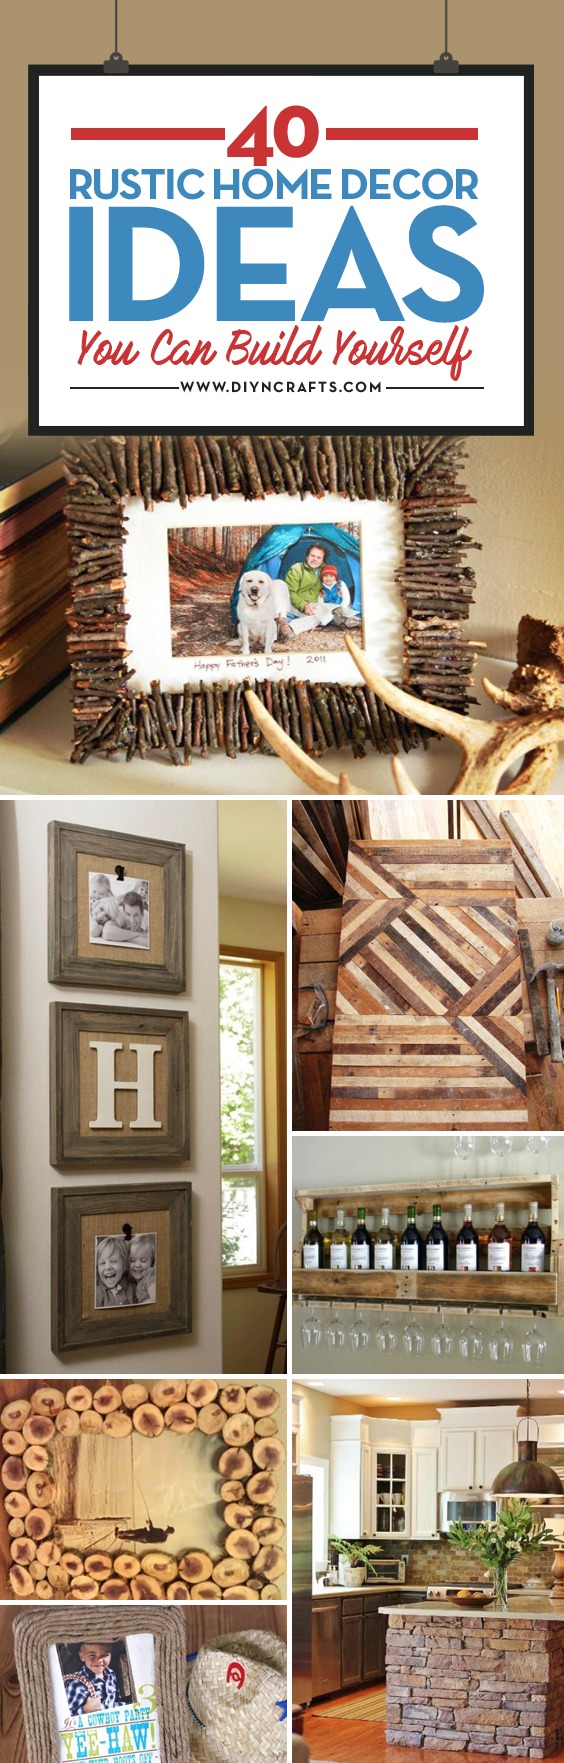 40 Rustic Home Decor Ideas You Can Build Yourself - DIY & Crafts